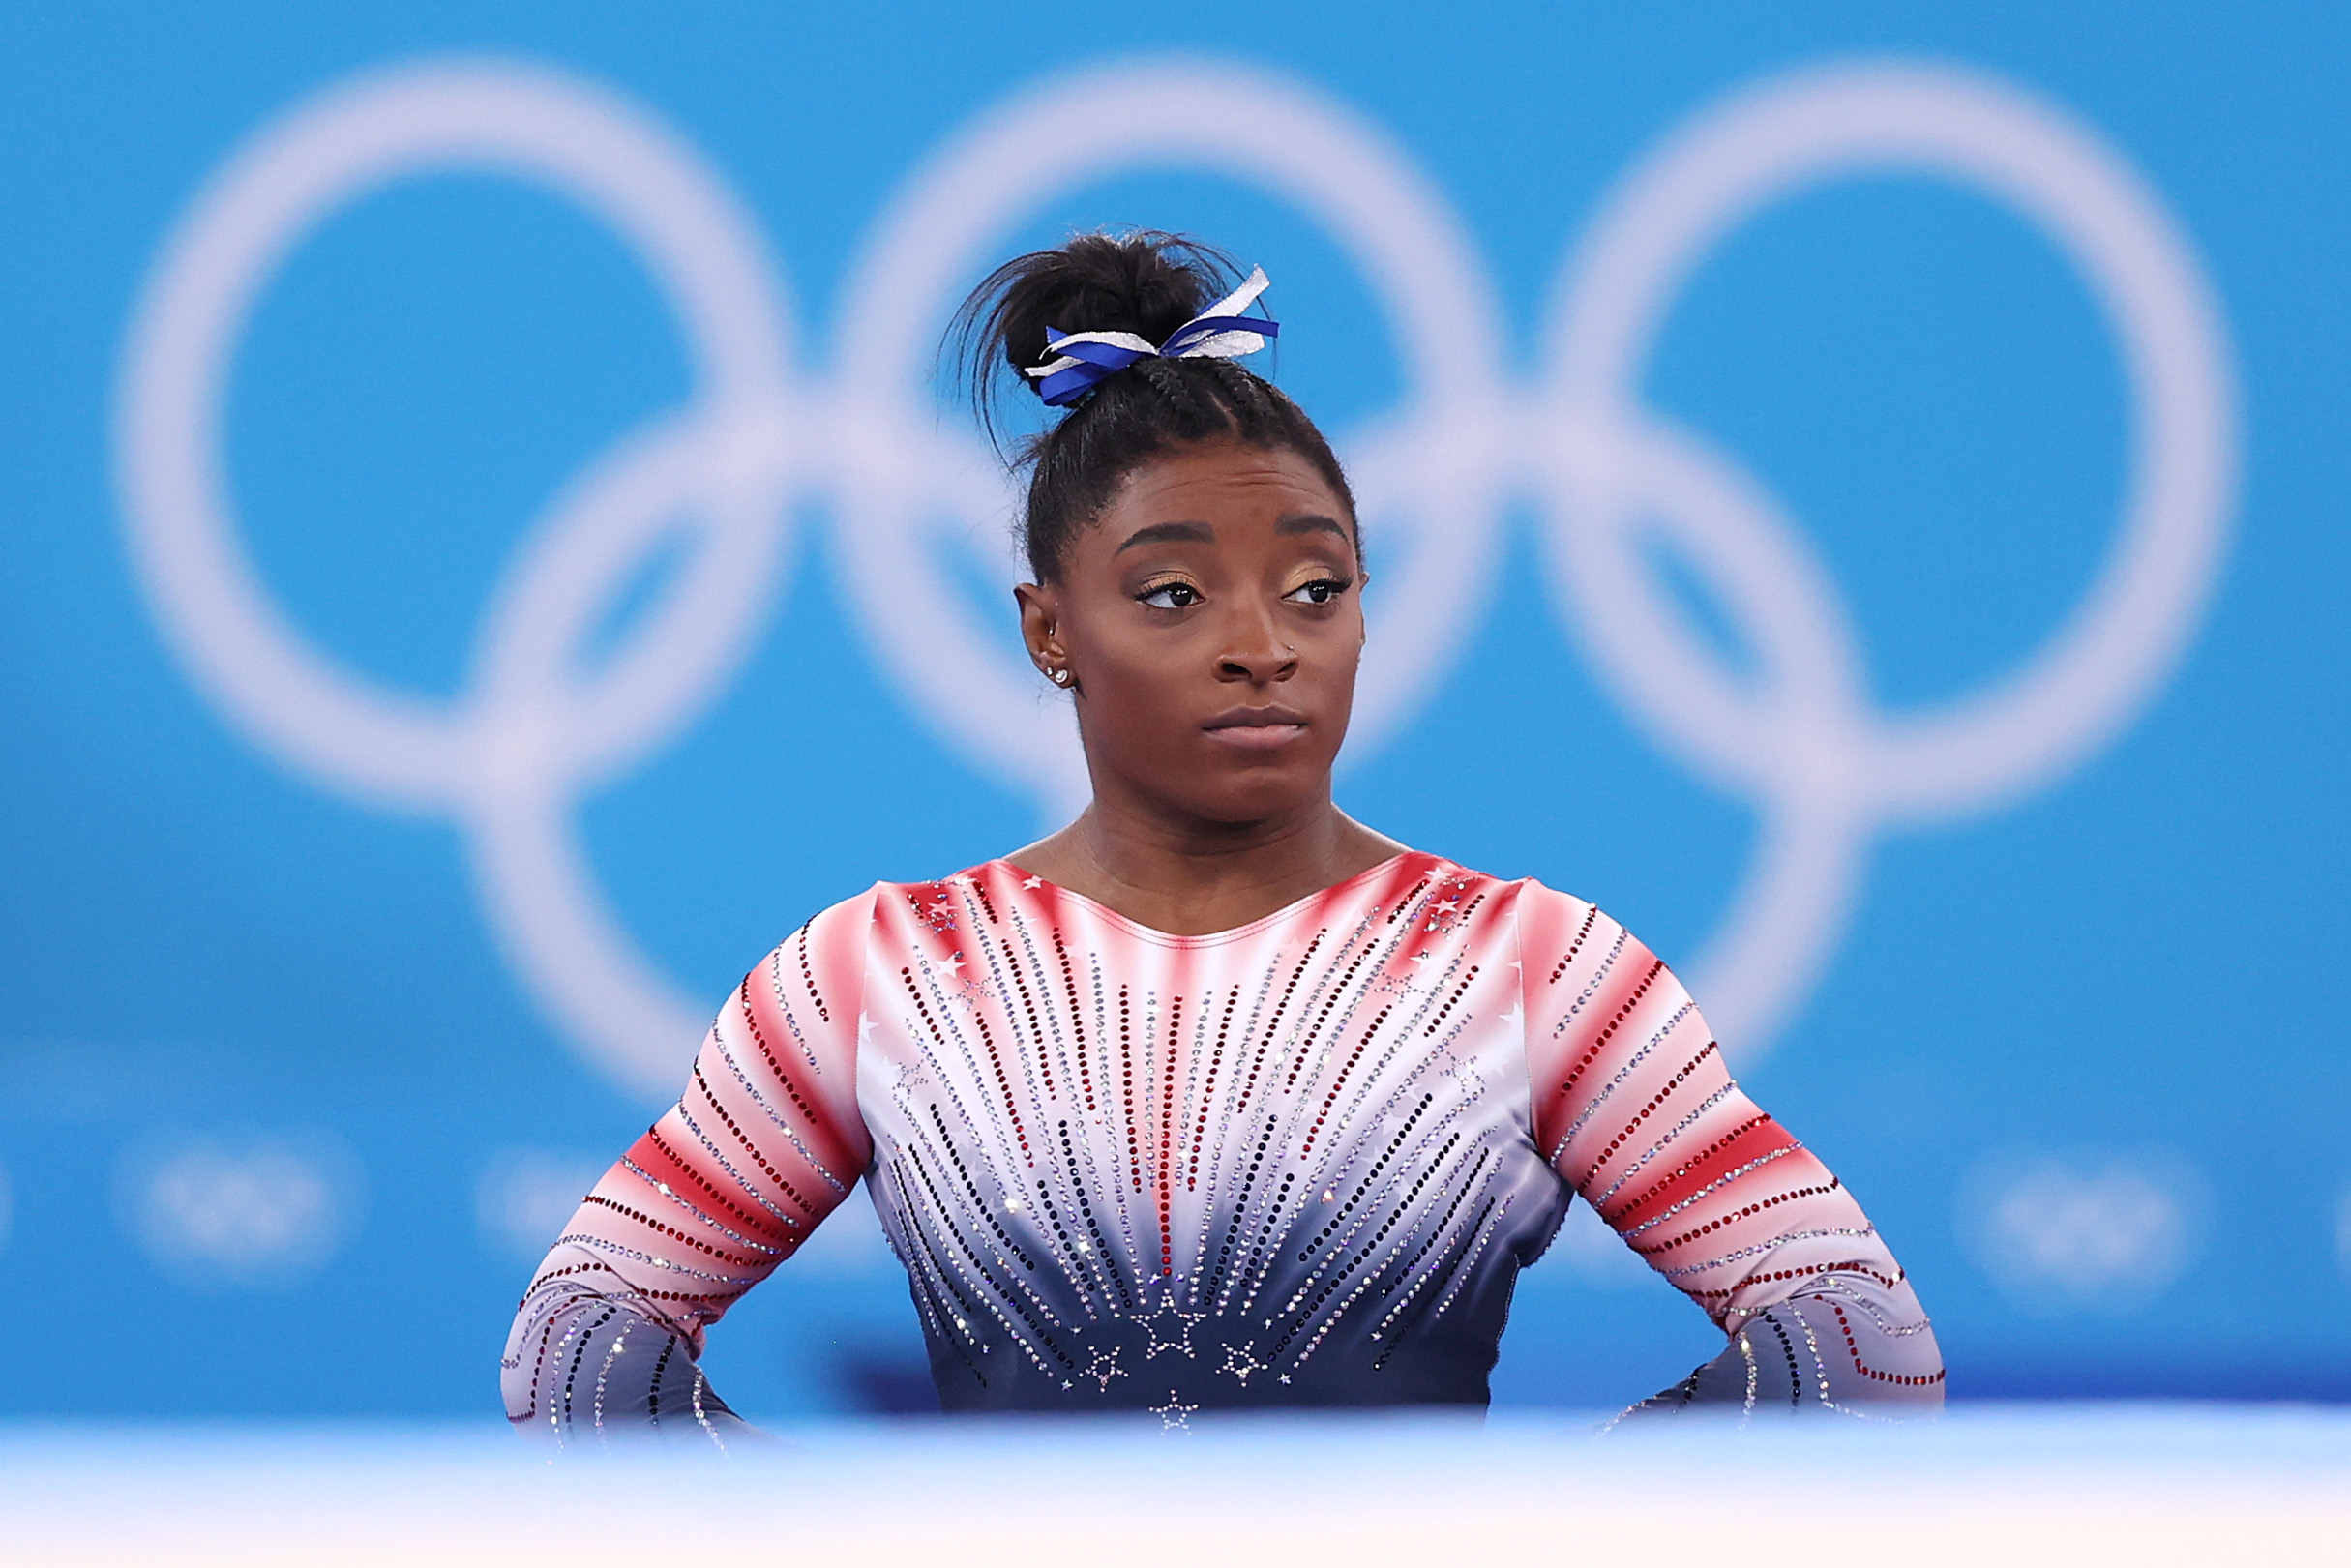 Simone Biles warms up prior to the Women's Balance Beam Final on day eleven of the Tokyo 2020 Olympic Games at Ariake Gymnastics Centre, on August 3, 2021, in Tokyo, Japan. | Source: Getty Images